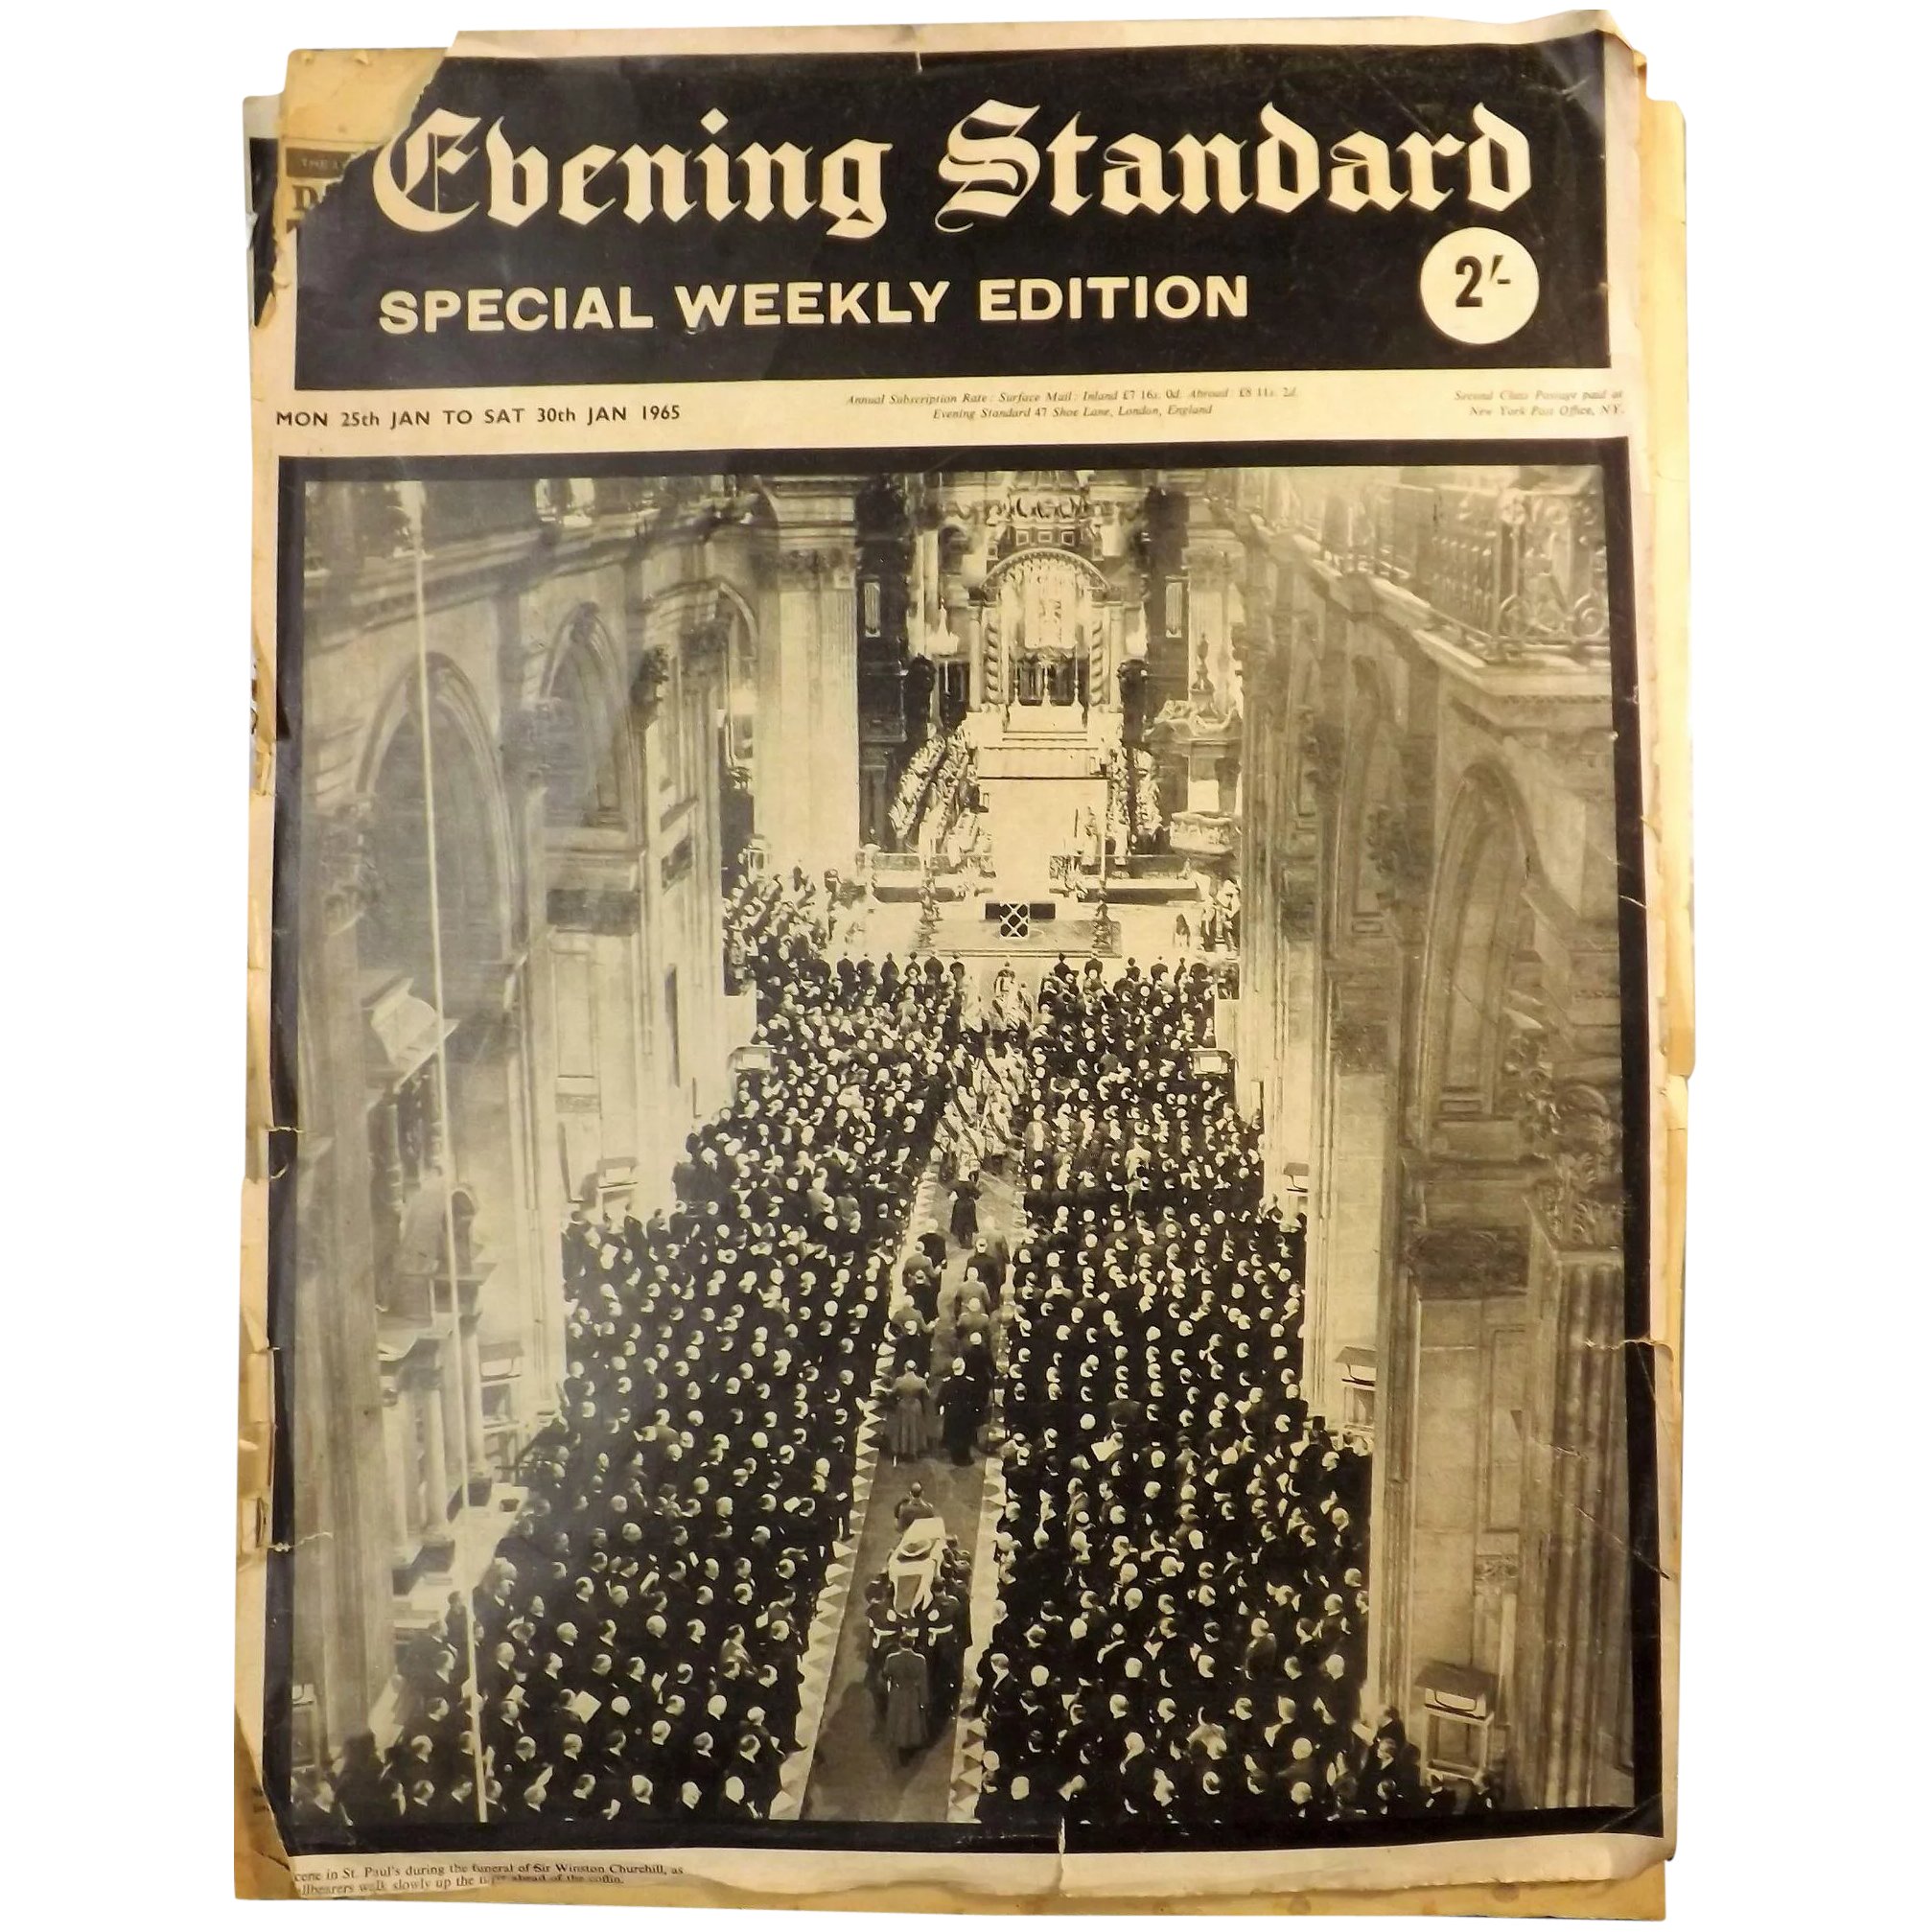 Winston Churchill - Special Weekly Edition EVENING STANDARD January 1965